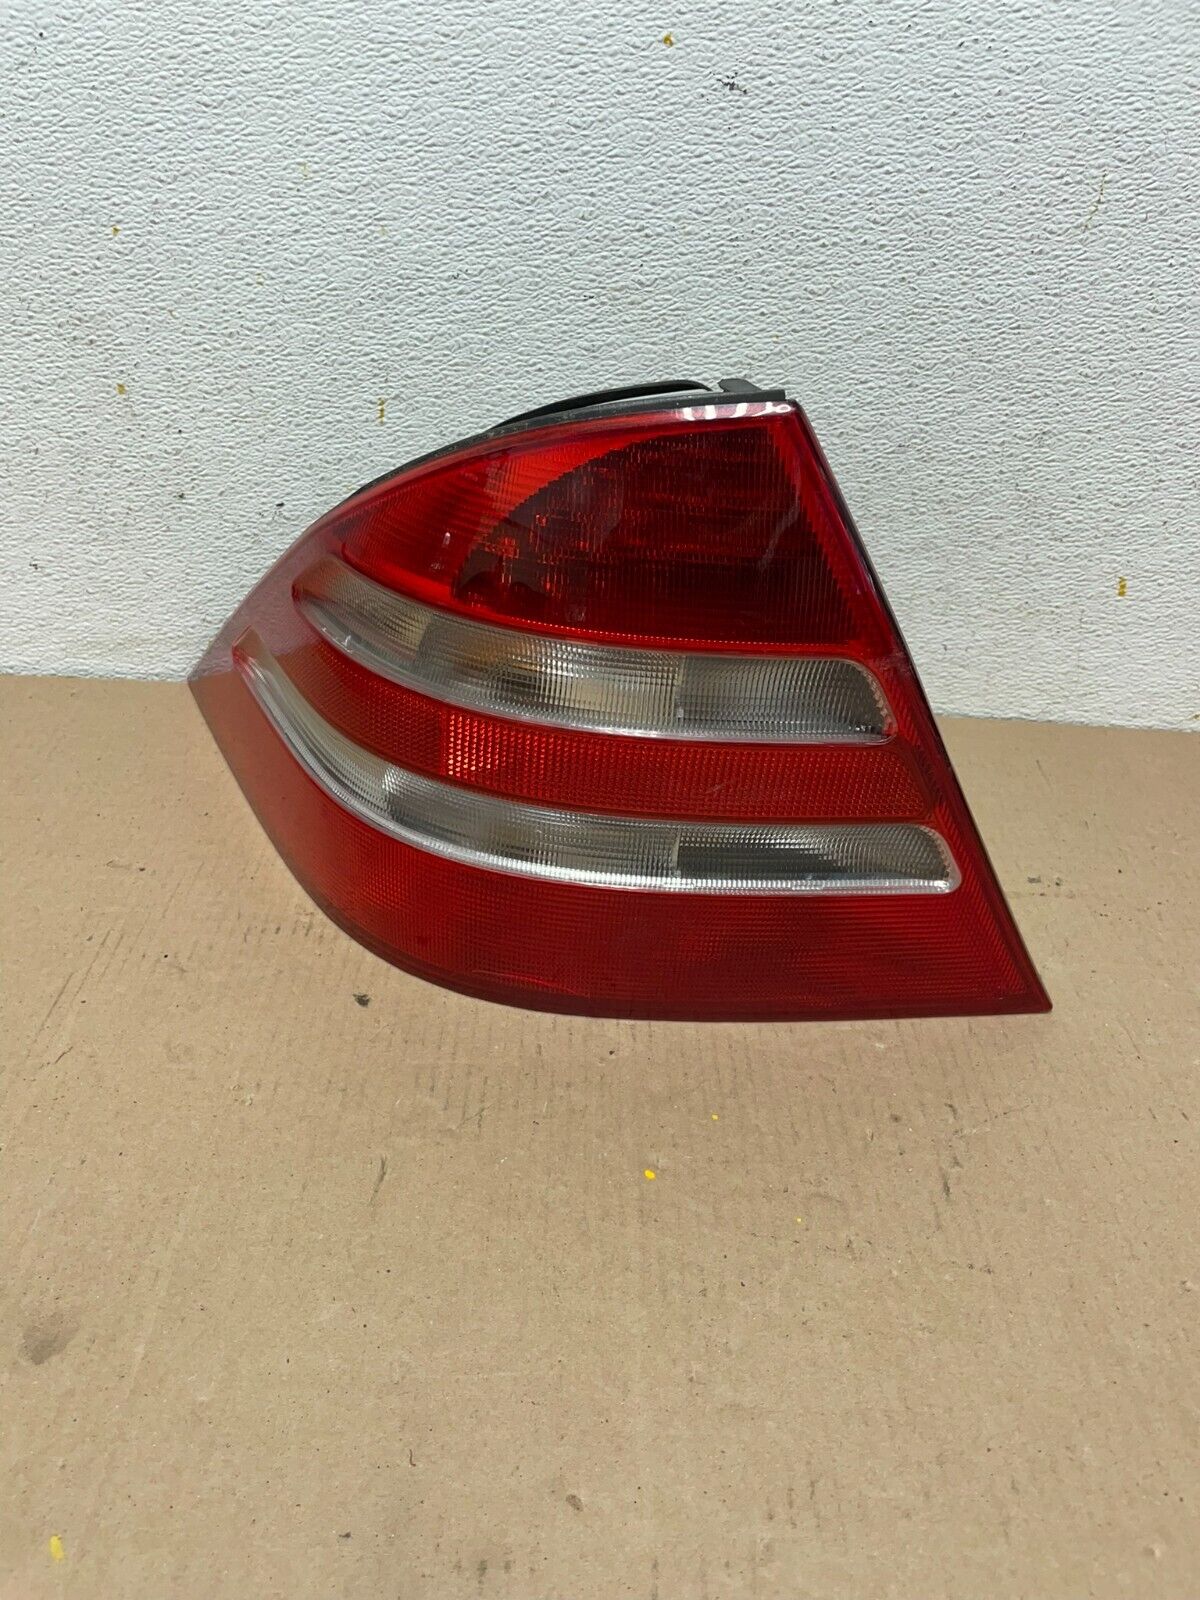 2000 to 2002 Mercedes-Benz S-Class Tail Light Left Driver Side 4821R Oem DG1